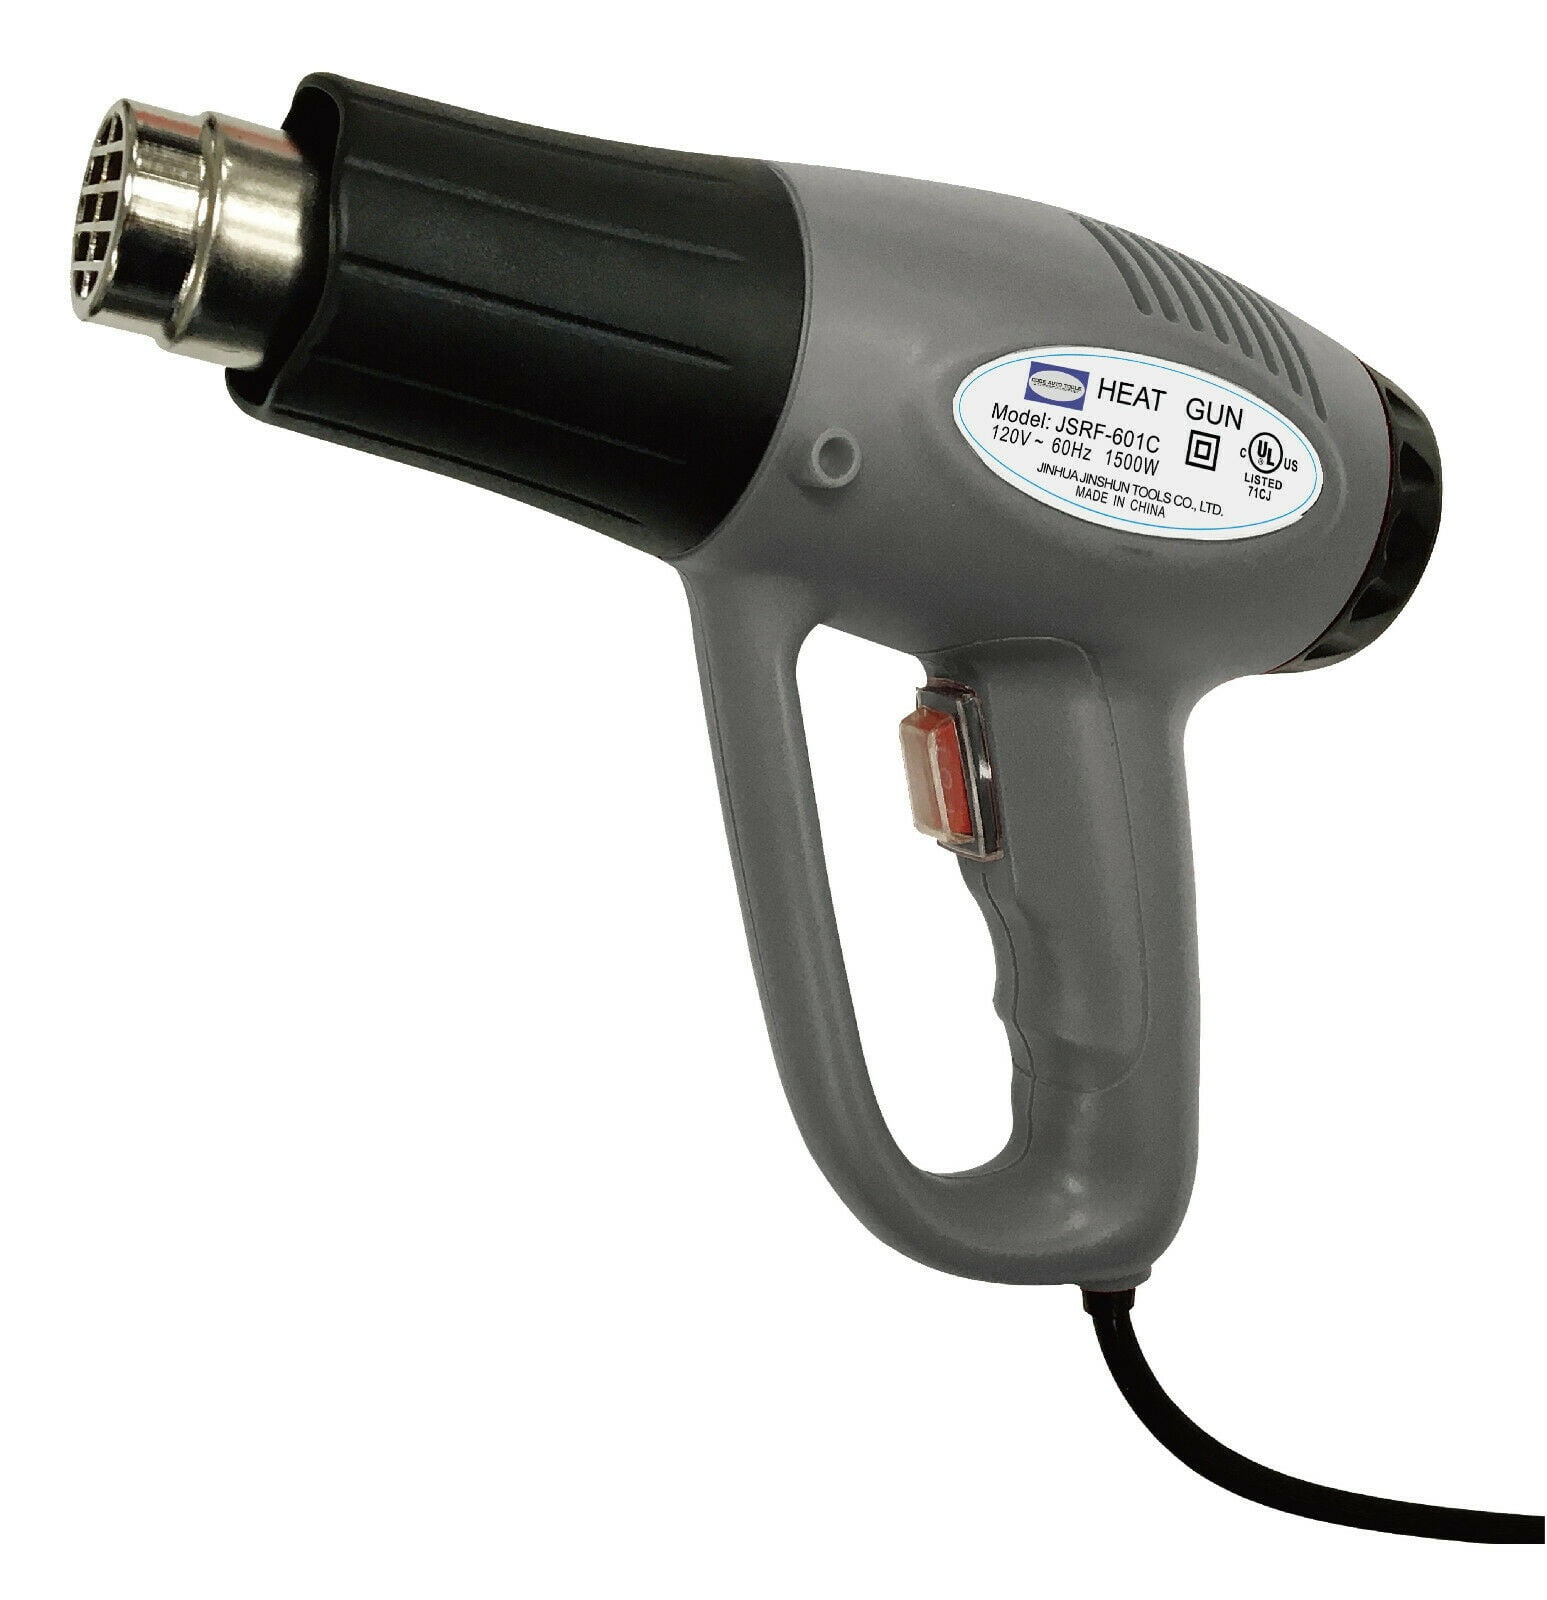 BHSG1100, Heat Gun, Electronic Variable Thermal Control Dial, 2-Speed  Motor, Built-in Safety Stand, BHSG1100